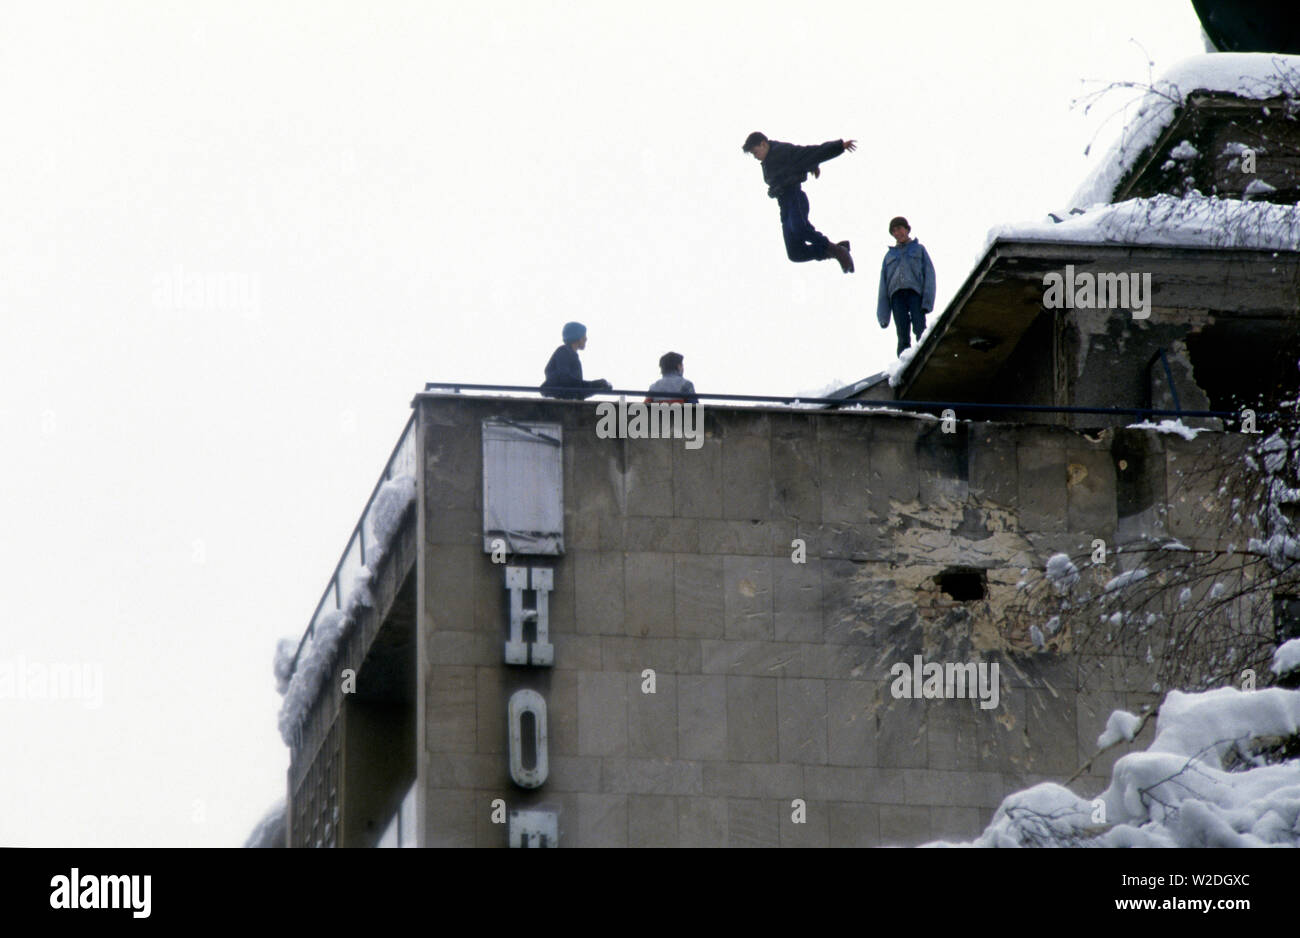 28th March 1993 During the Siege of Sarajevo: young boys play on the roof of the Hotel Europa, high above Jugoslovenske Narodne Armije (renamed Zelenih beretki Street after the war). Below them is a big hole in the wall, caused by a mortar bomb or artillery shell. Stock Photo